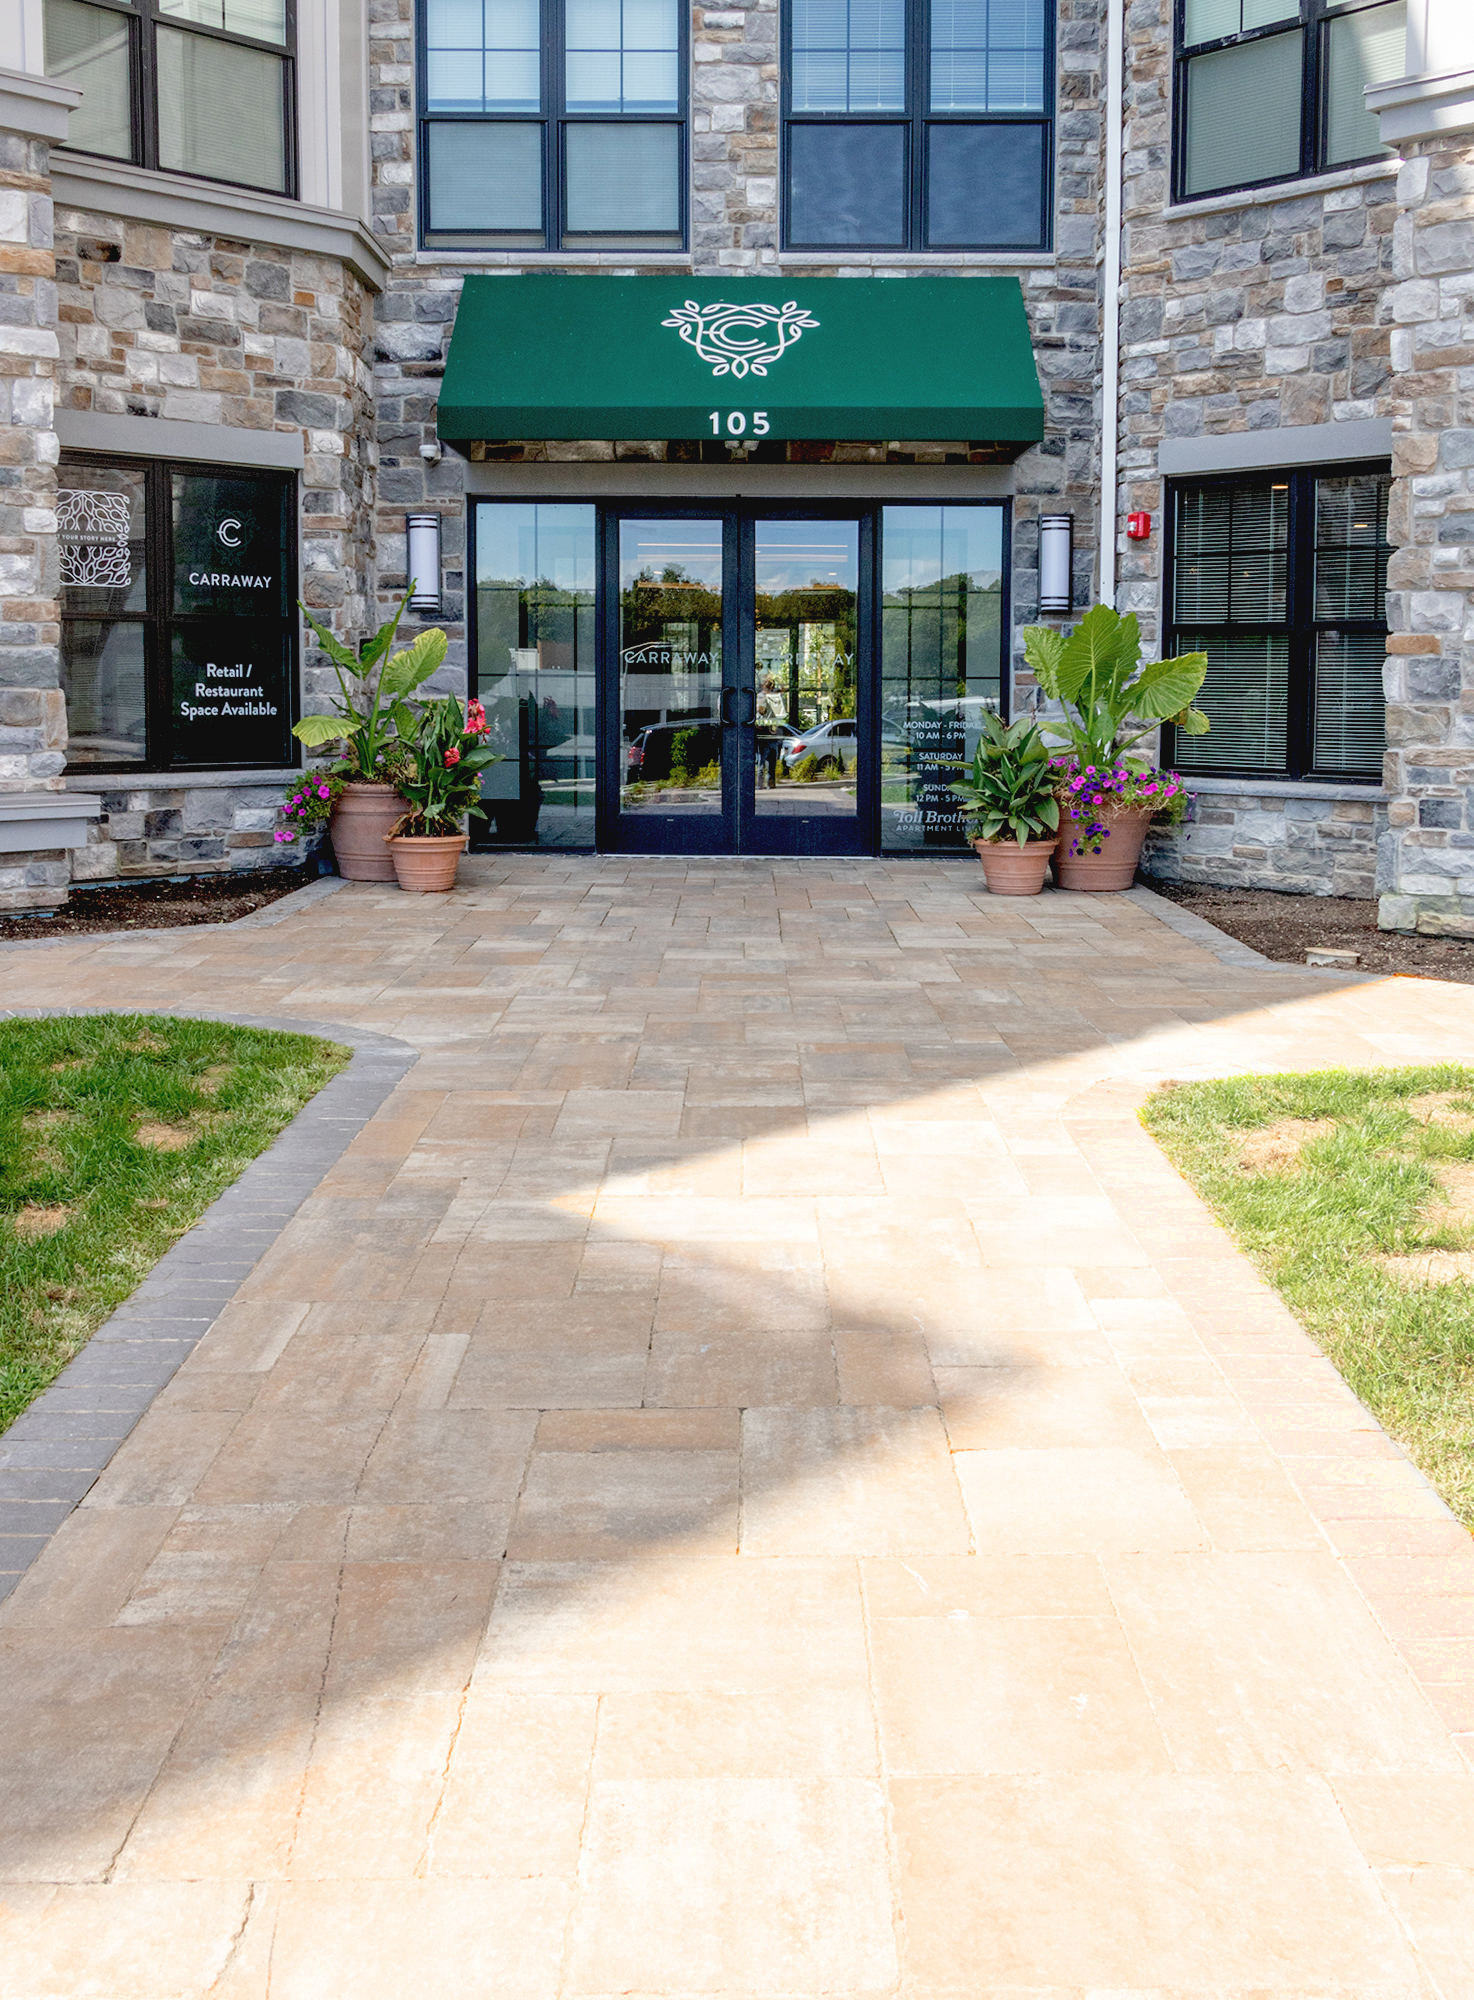 Brown-colored Bristol Valley pavers guide visitors the entryway of the brick condo building, with decorative seasonal planters at the door.